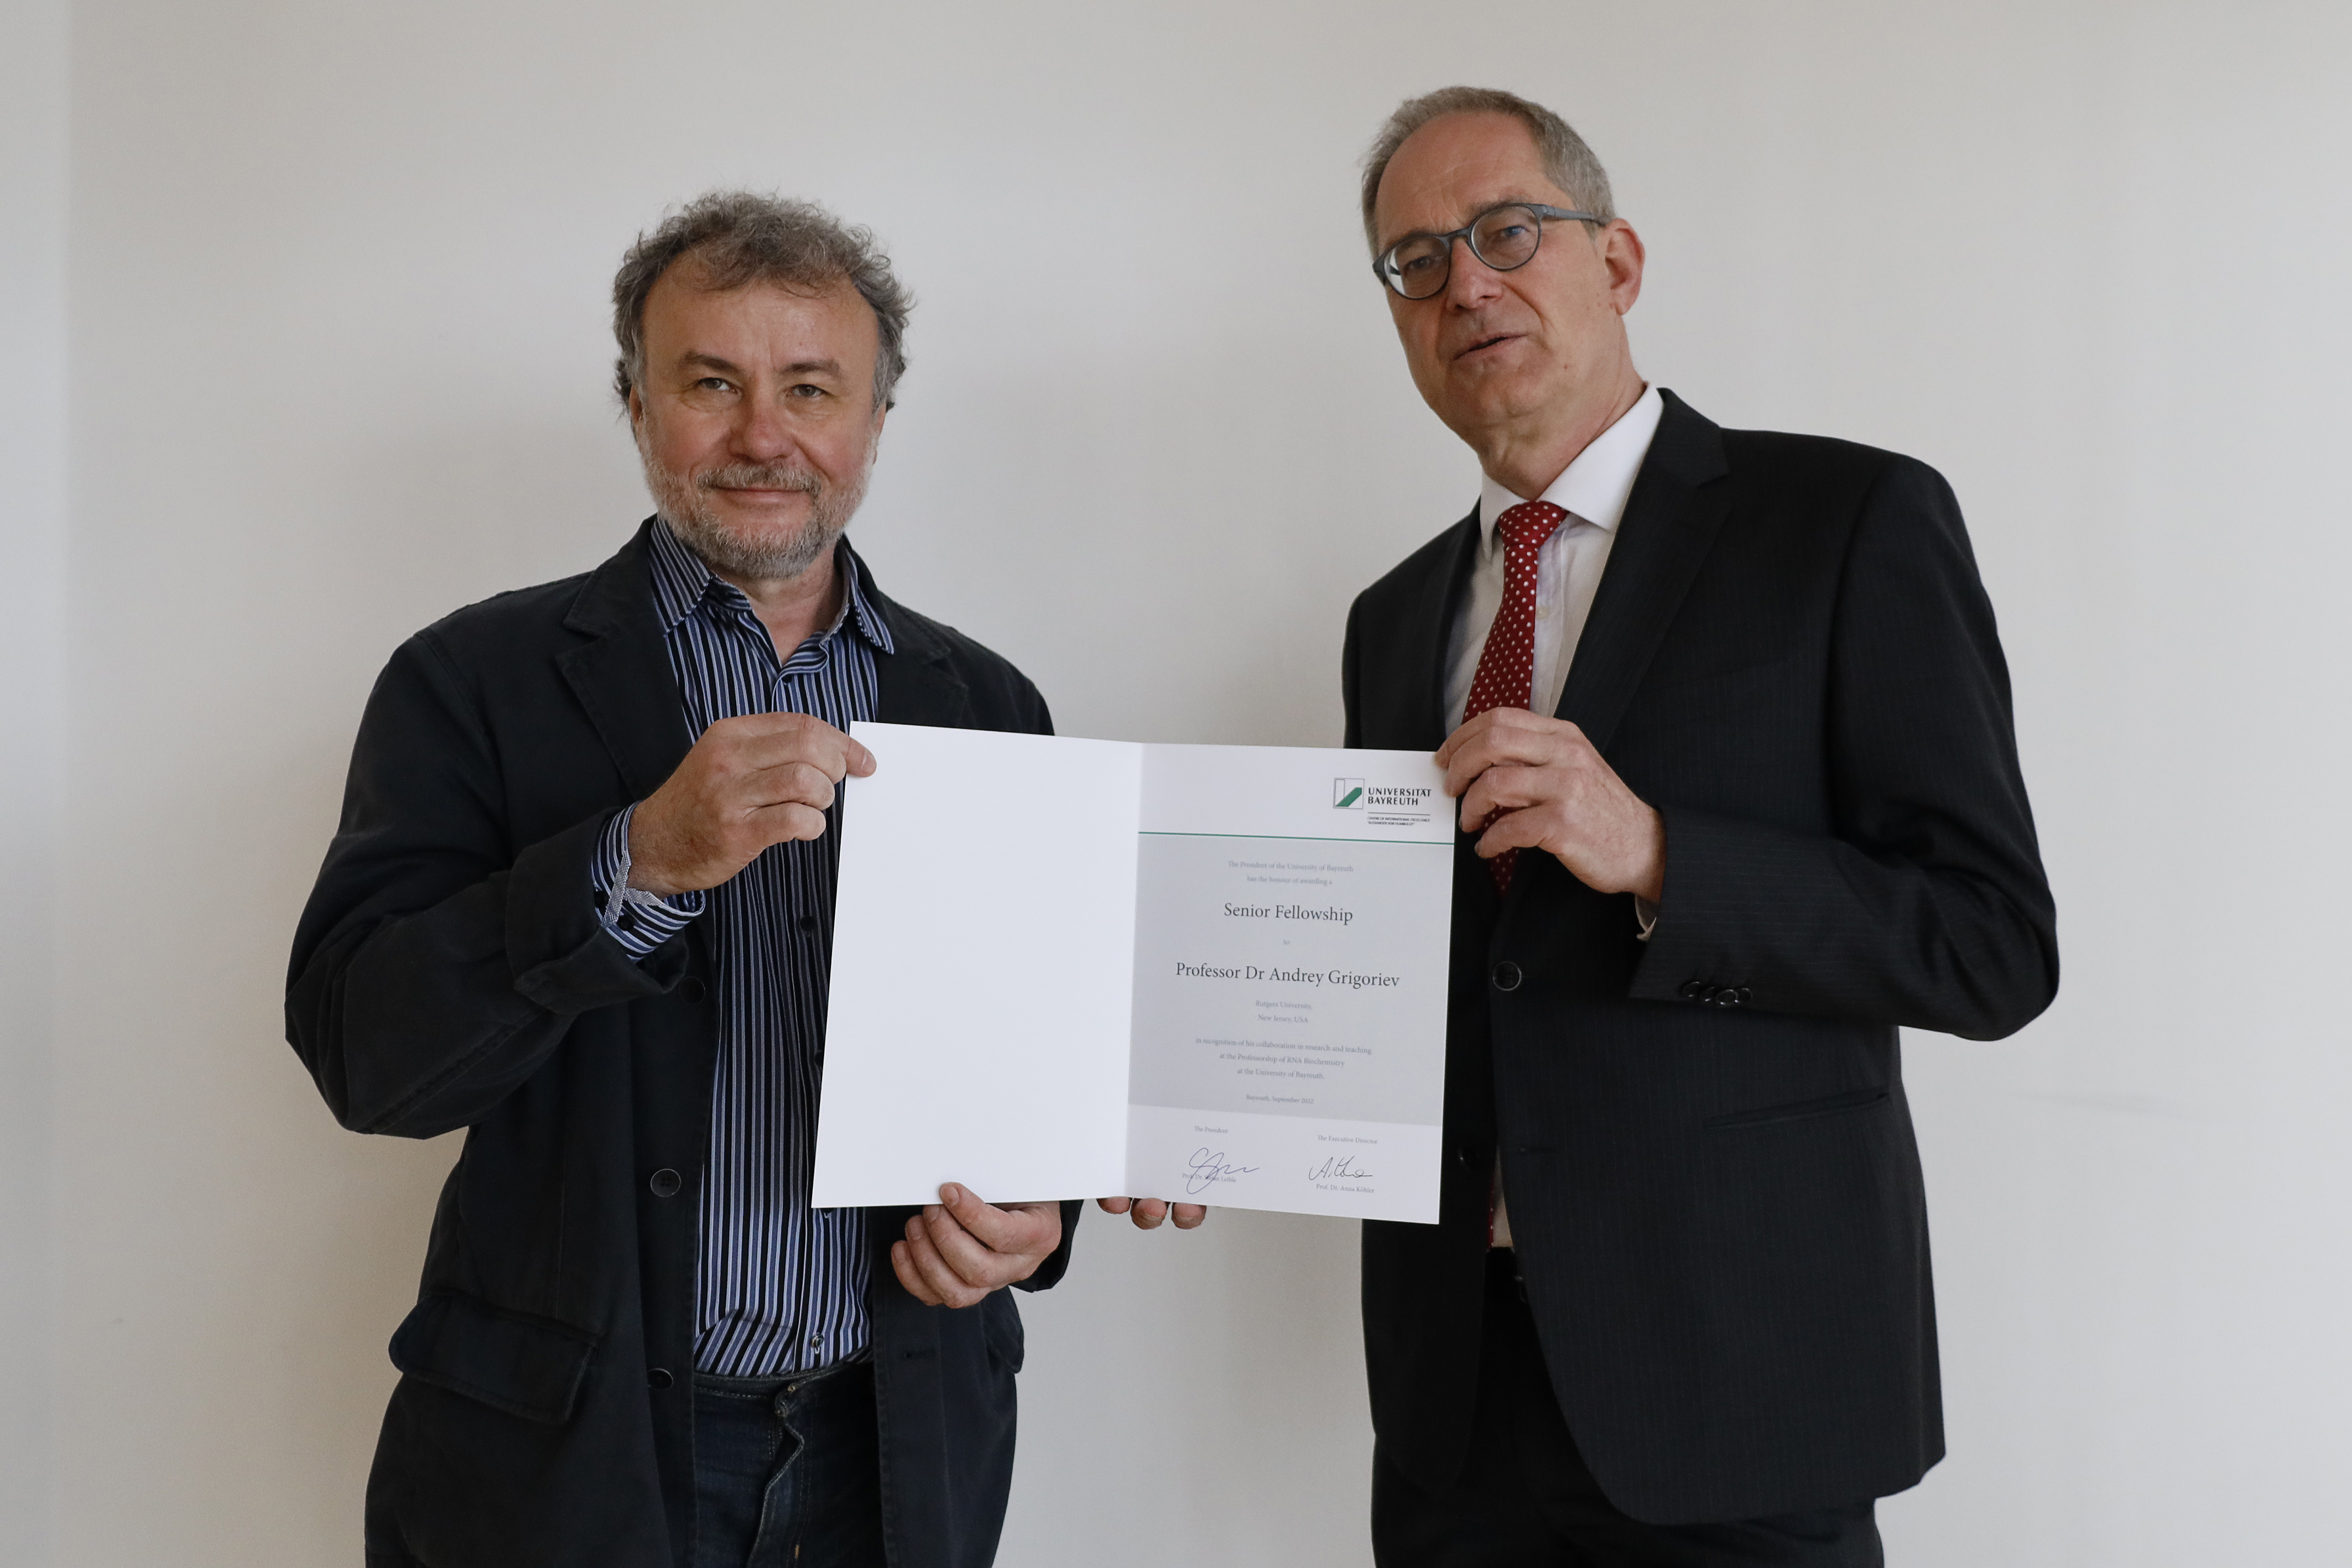 Professor Andrey Grigoriev and the President of the University of Bayreuth